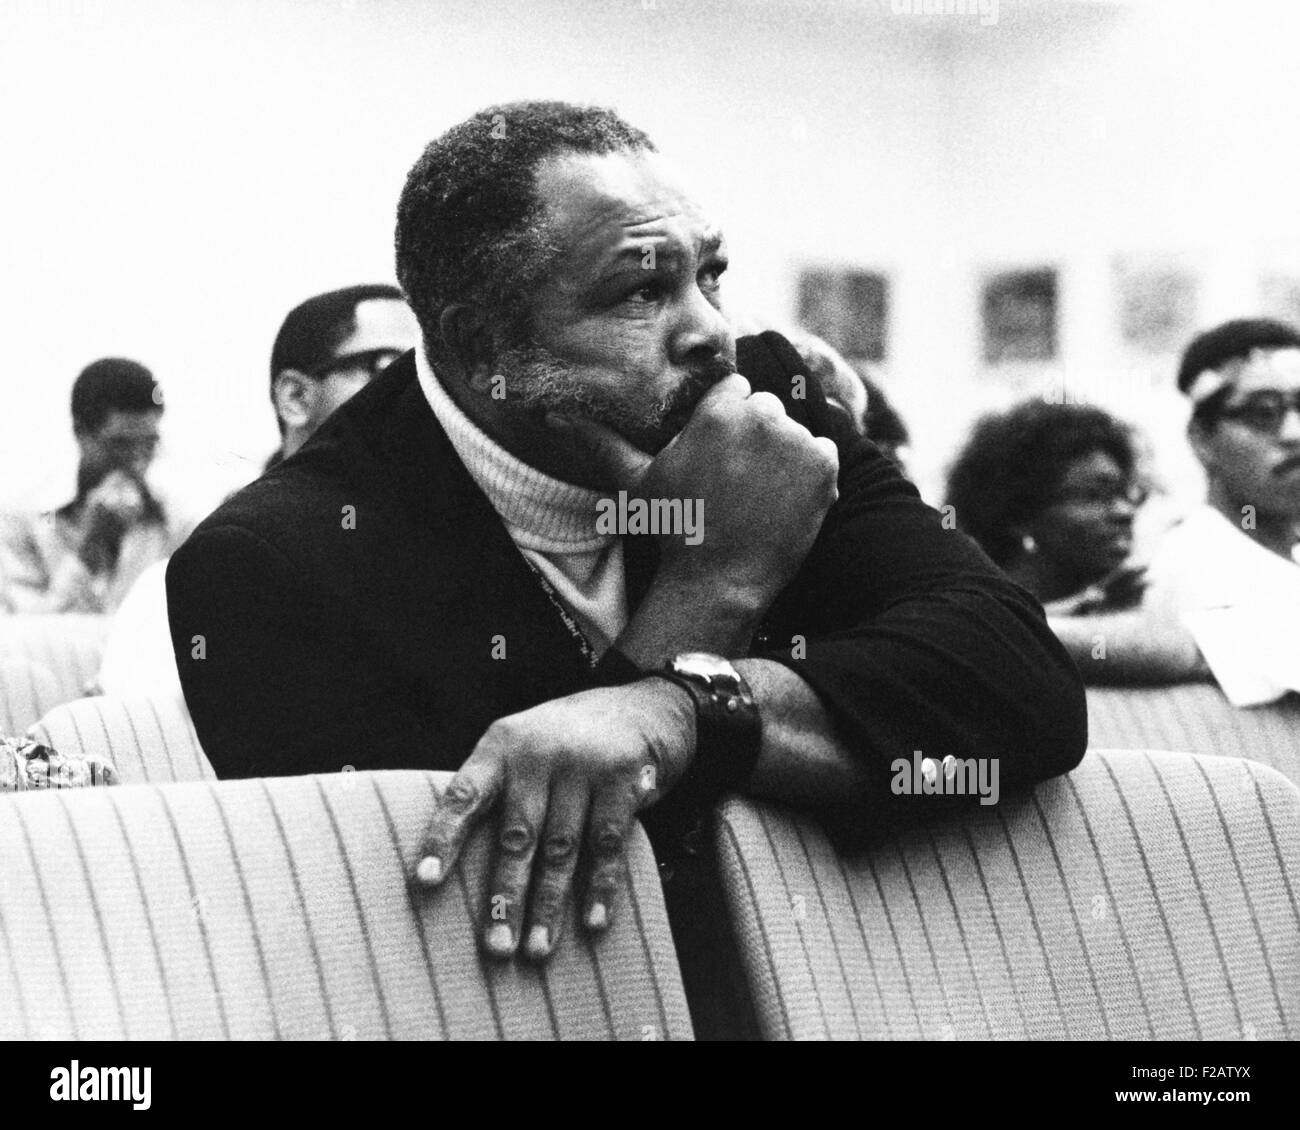 Archie Moore during a meeting of Las Vegas after the disturbances in the Black community. Nov. 18, 1969. Moore volunteered his services to try to find the causes of the tension and gave his ideas about how it could be eased. (CSU 2015 11 1530) Stock Photo